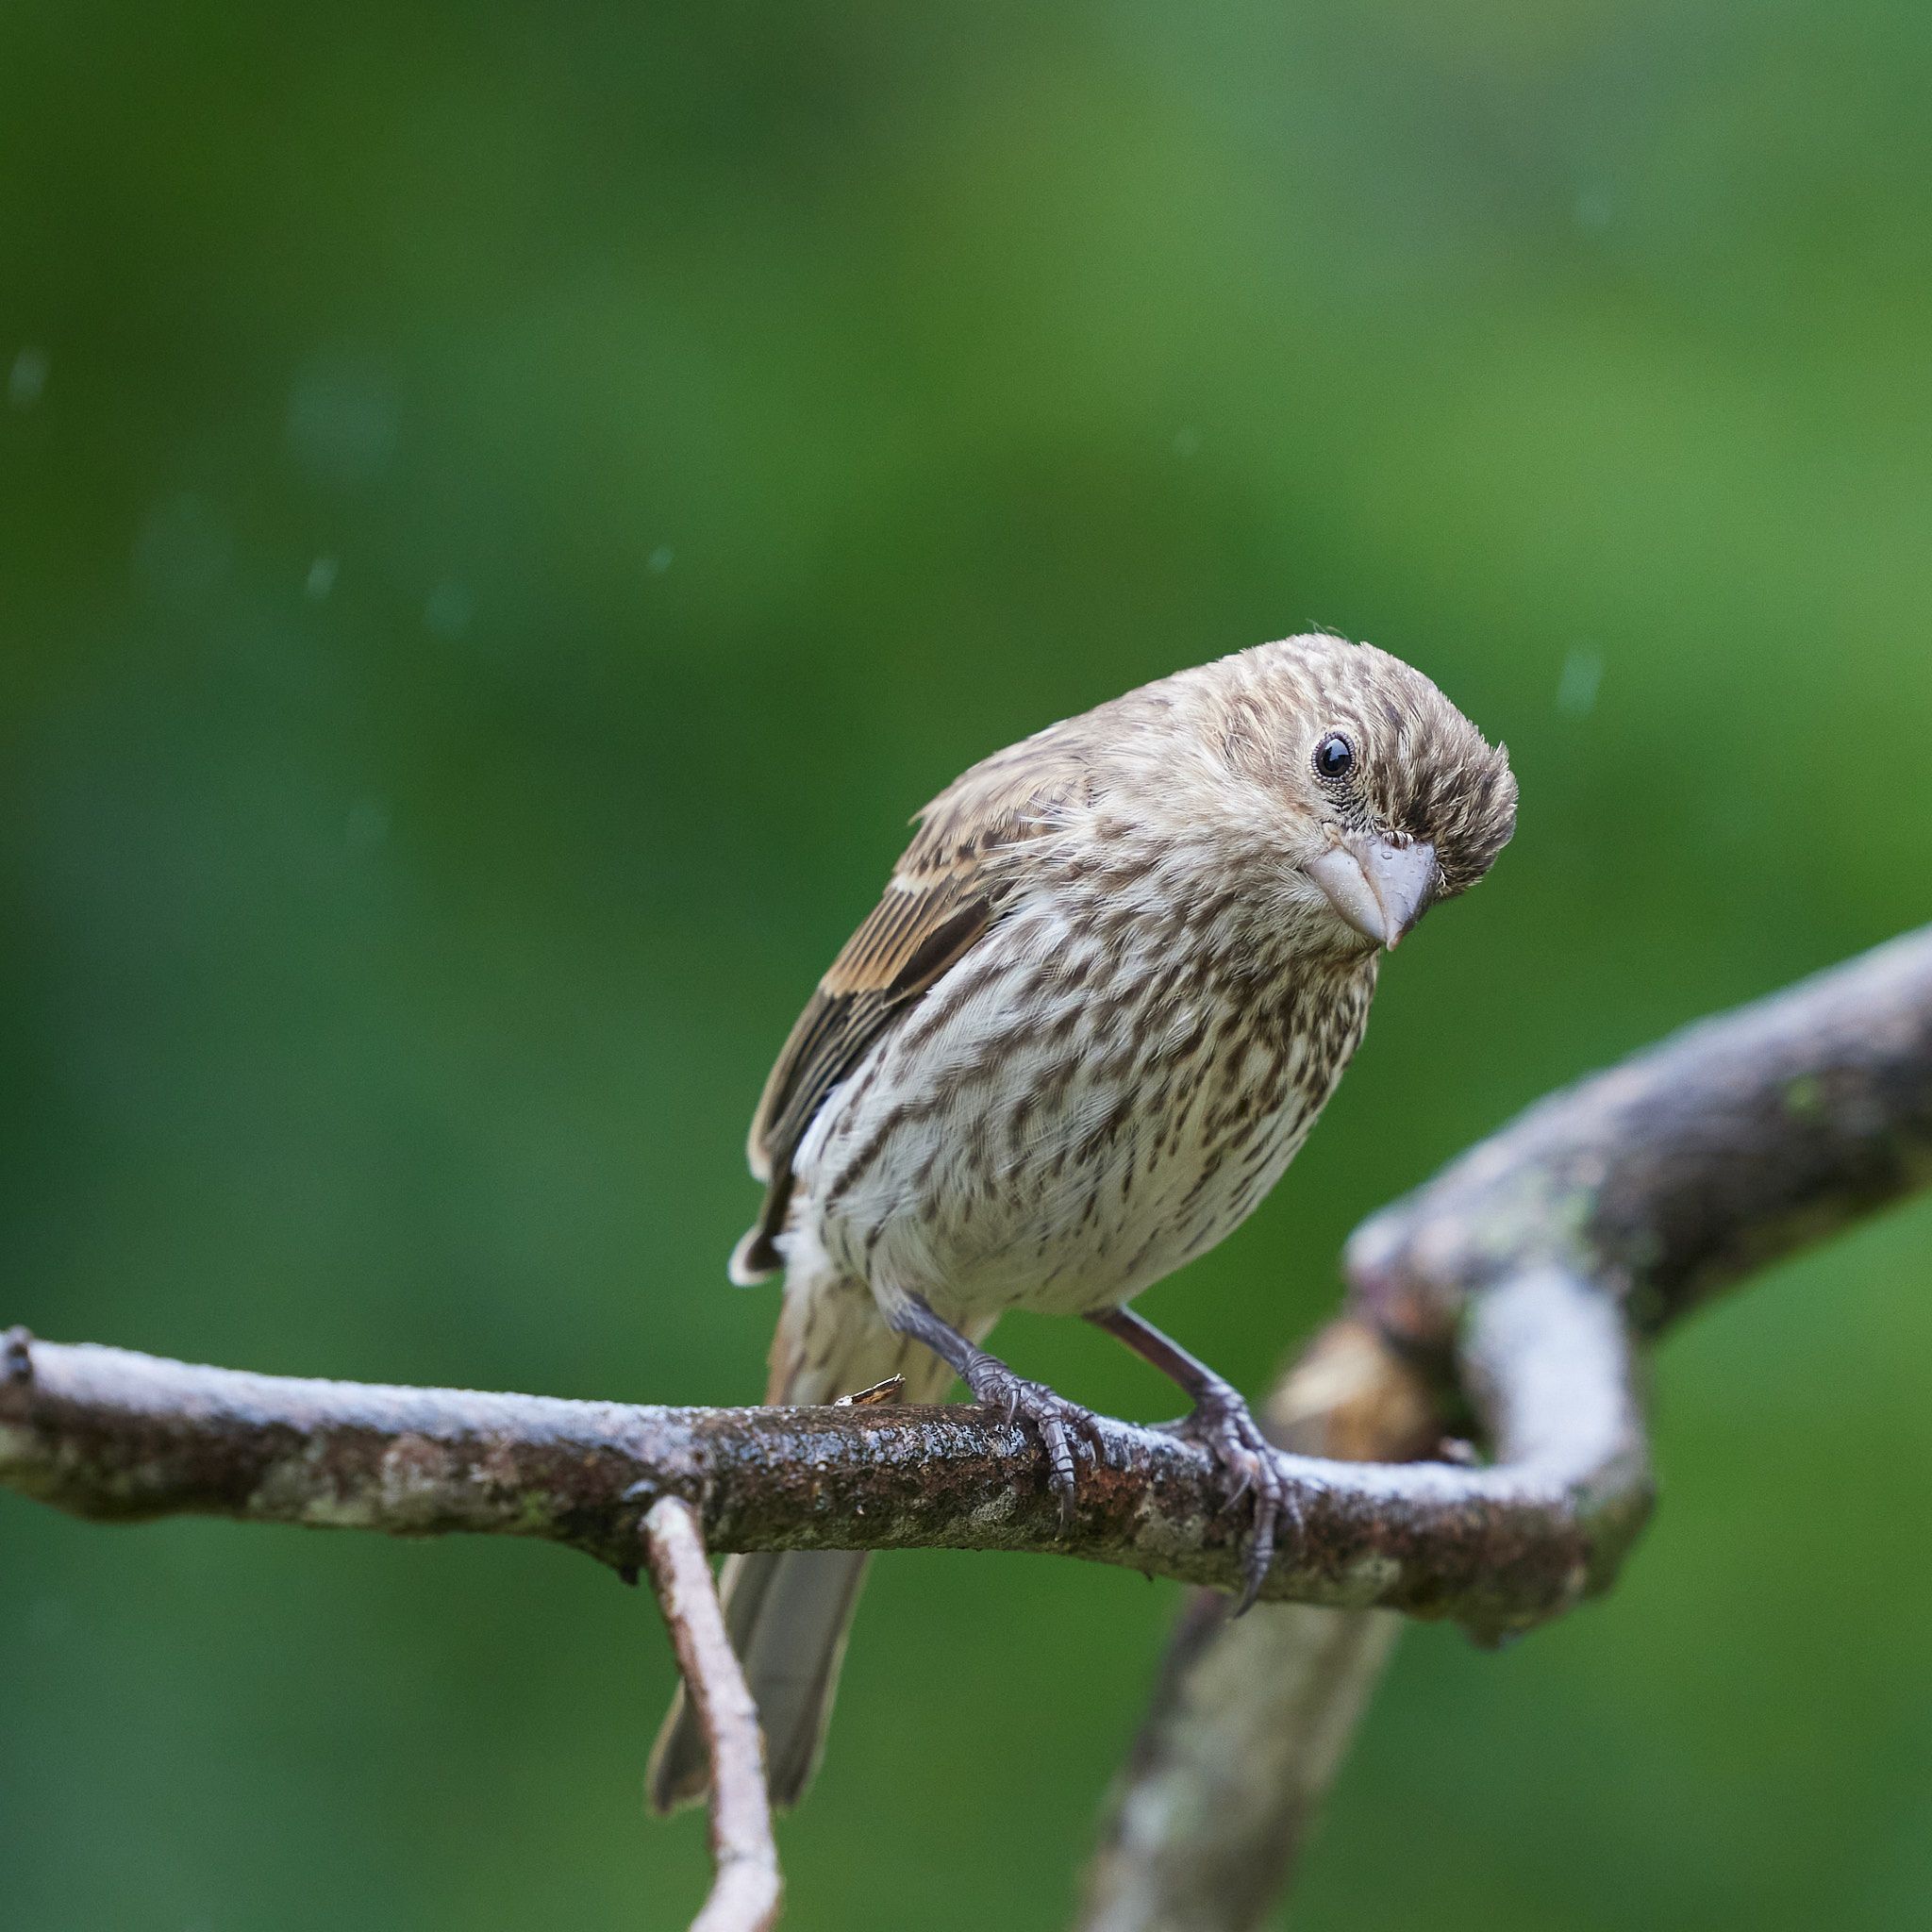 A house sparrow sitting on a wet branch in the rain.